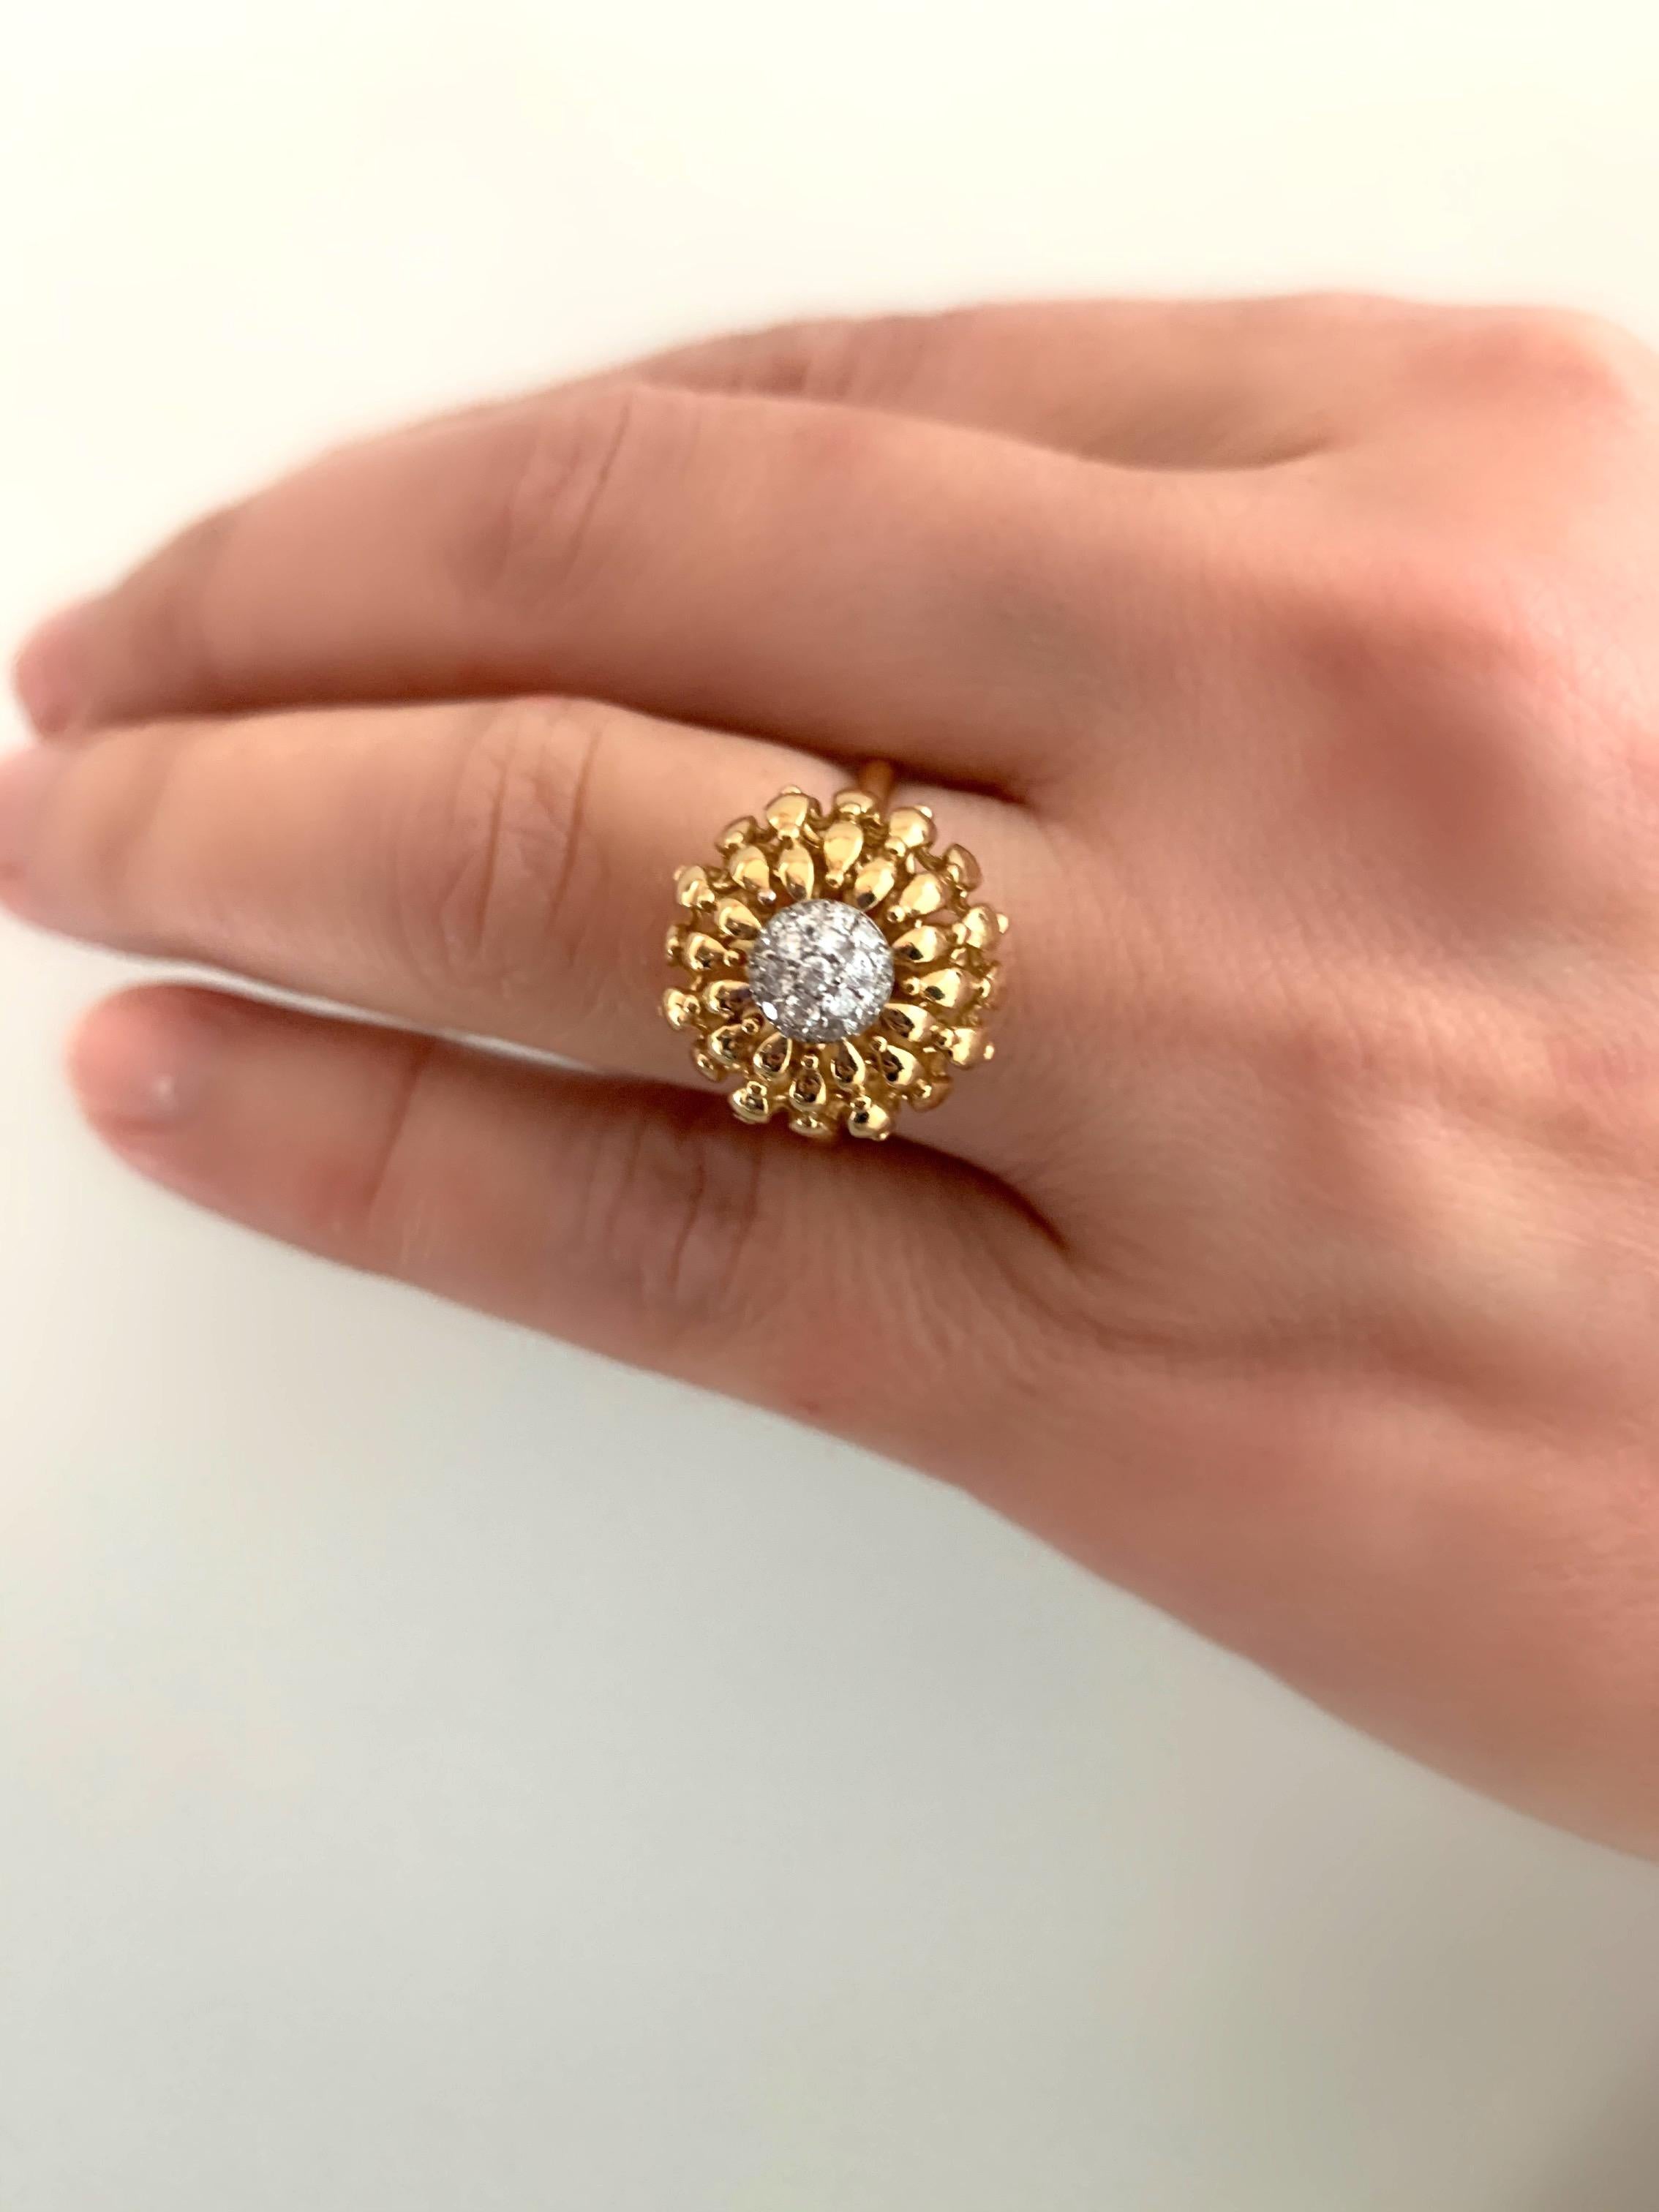 18K Yellow Gold Twist Floral Ring with White Diamonds
Gold Weight: 7.60 grams
Diamond Carats: White: 0.22 ct.
FerrariFirenze, Handmade in Italy.
Size 7
Style: FF118RG81

Gold Diamond Ring, ideal for everyday, special occasions, evening, or bridal